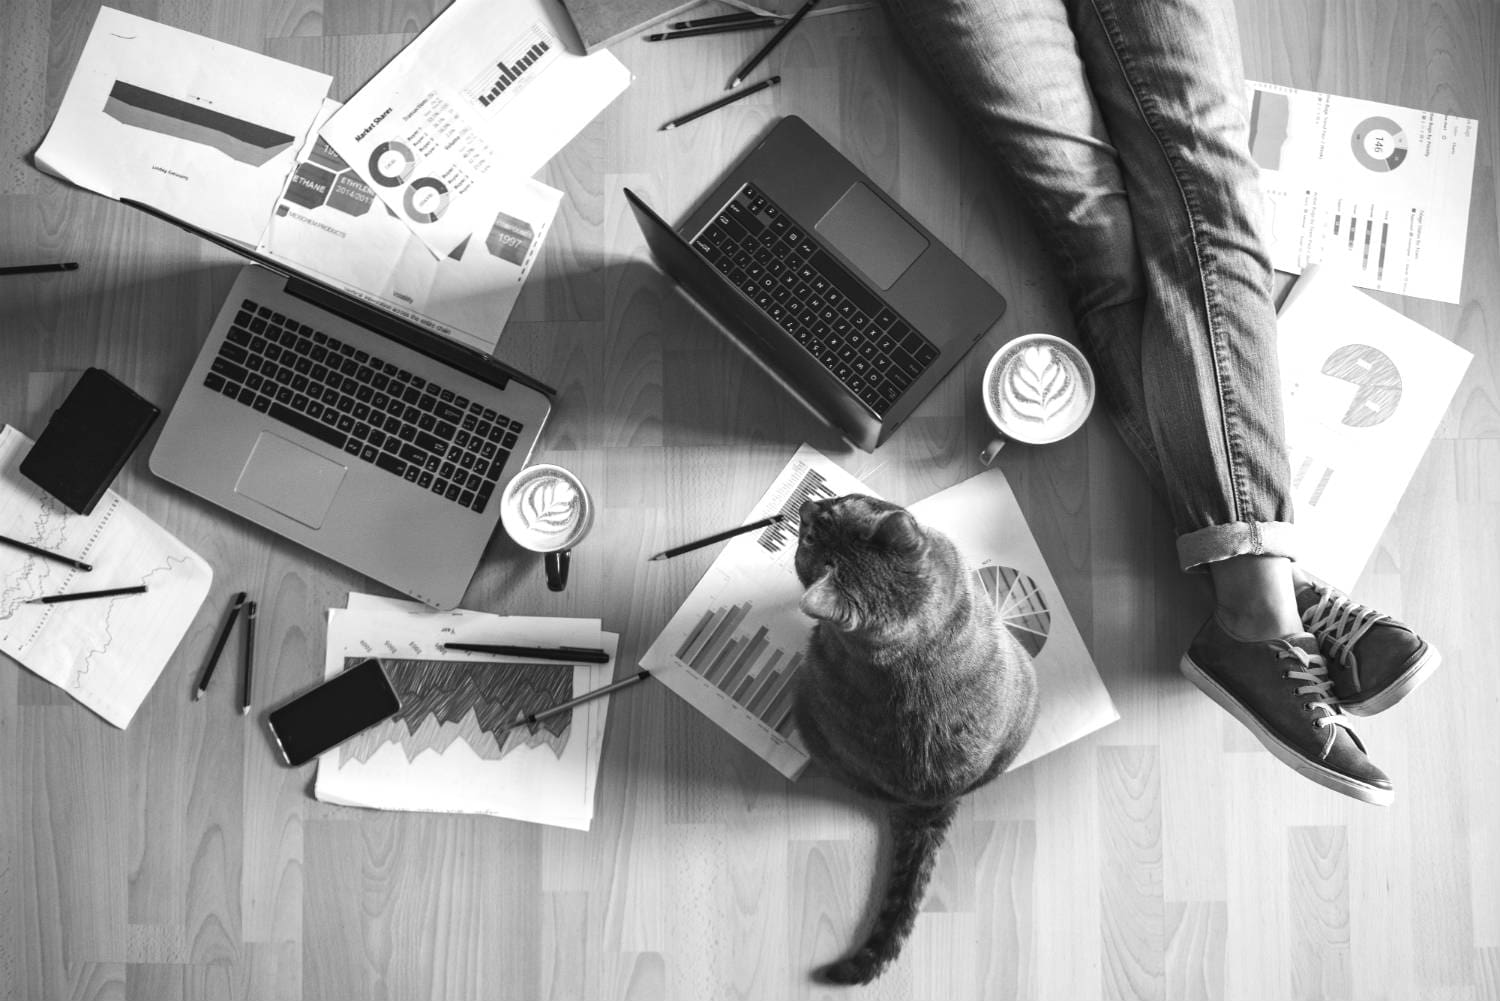 Person working on the floor with laptops coffee papers and a cat next to them